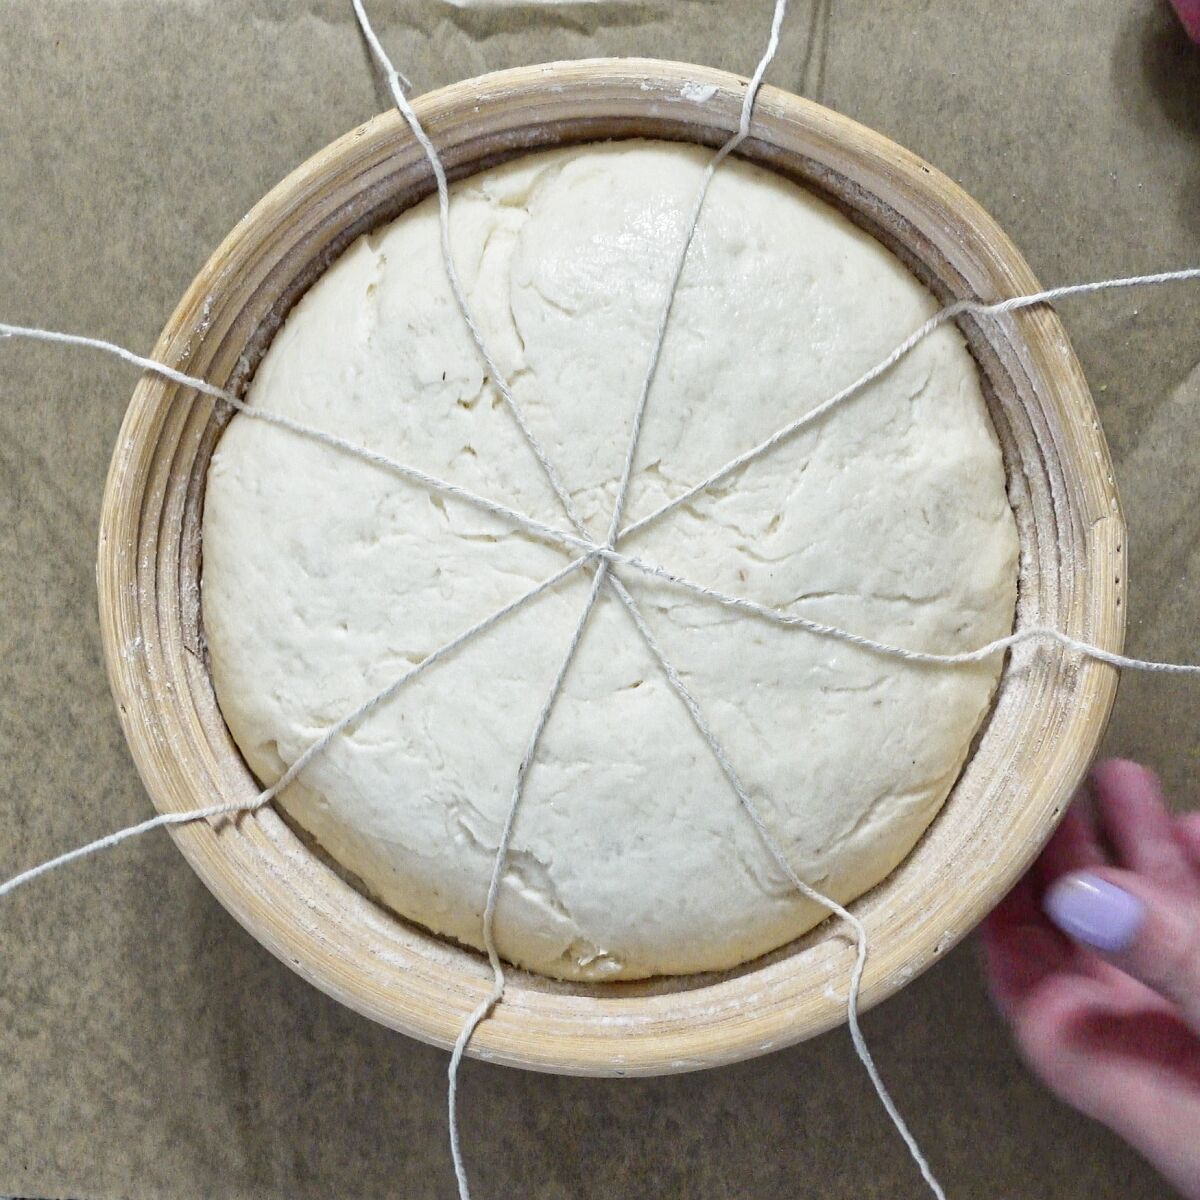 4 strings placed over top of risen dough in banneton.